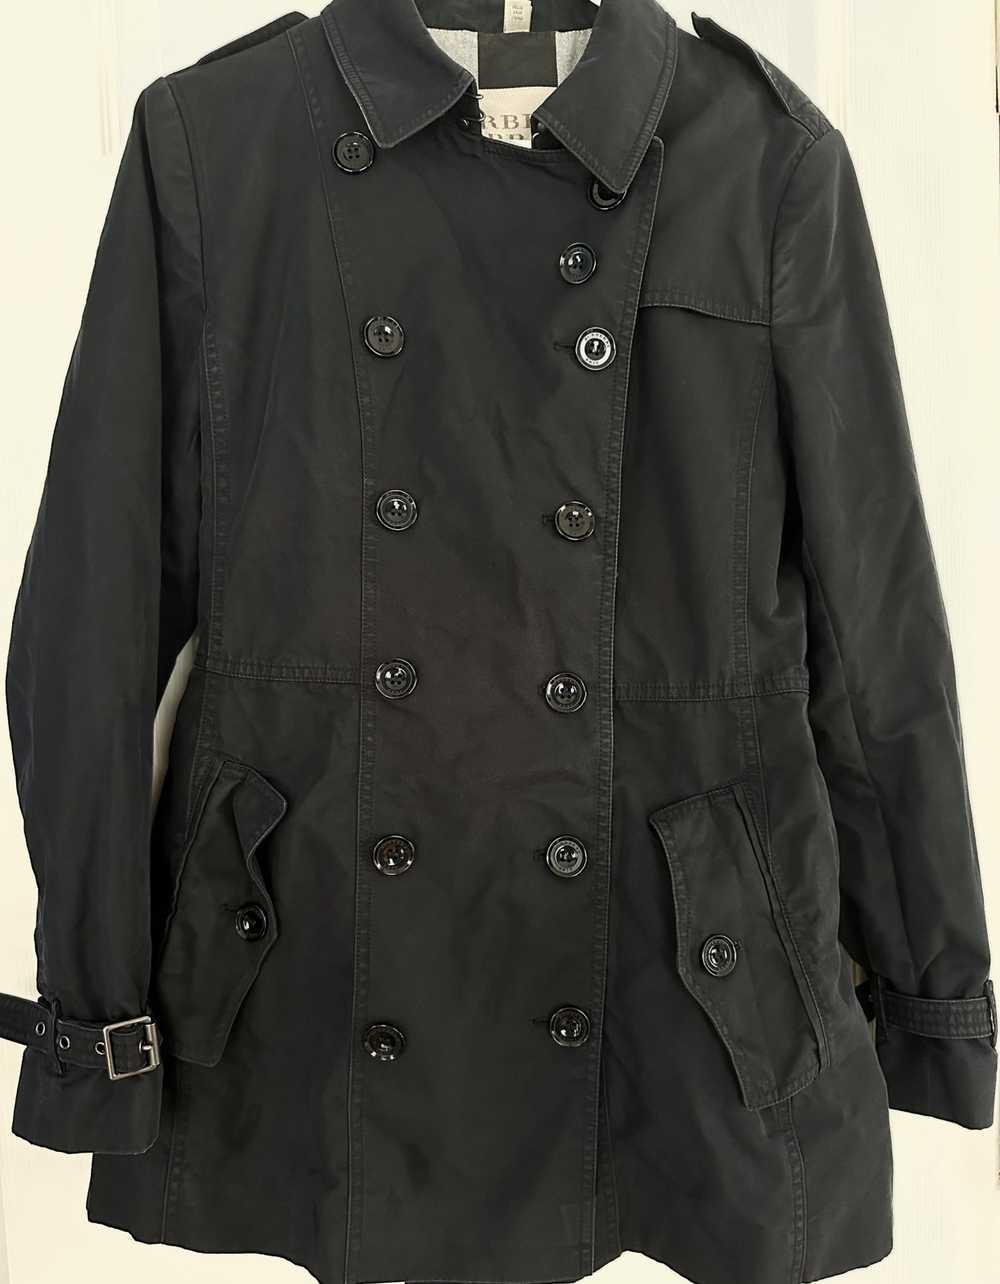 Burberry Double-breasted Wool Tailored Coat £2,490 - Shop Online